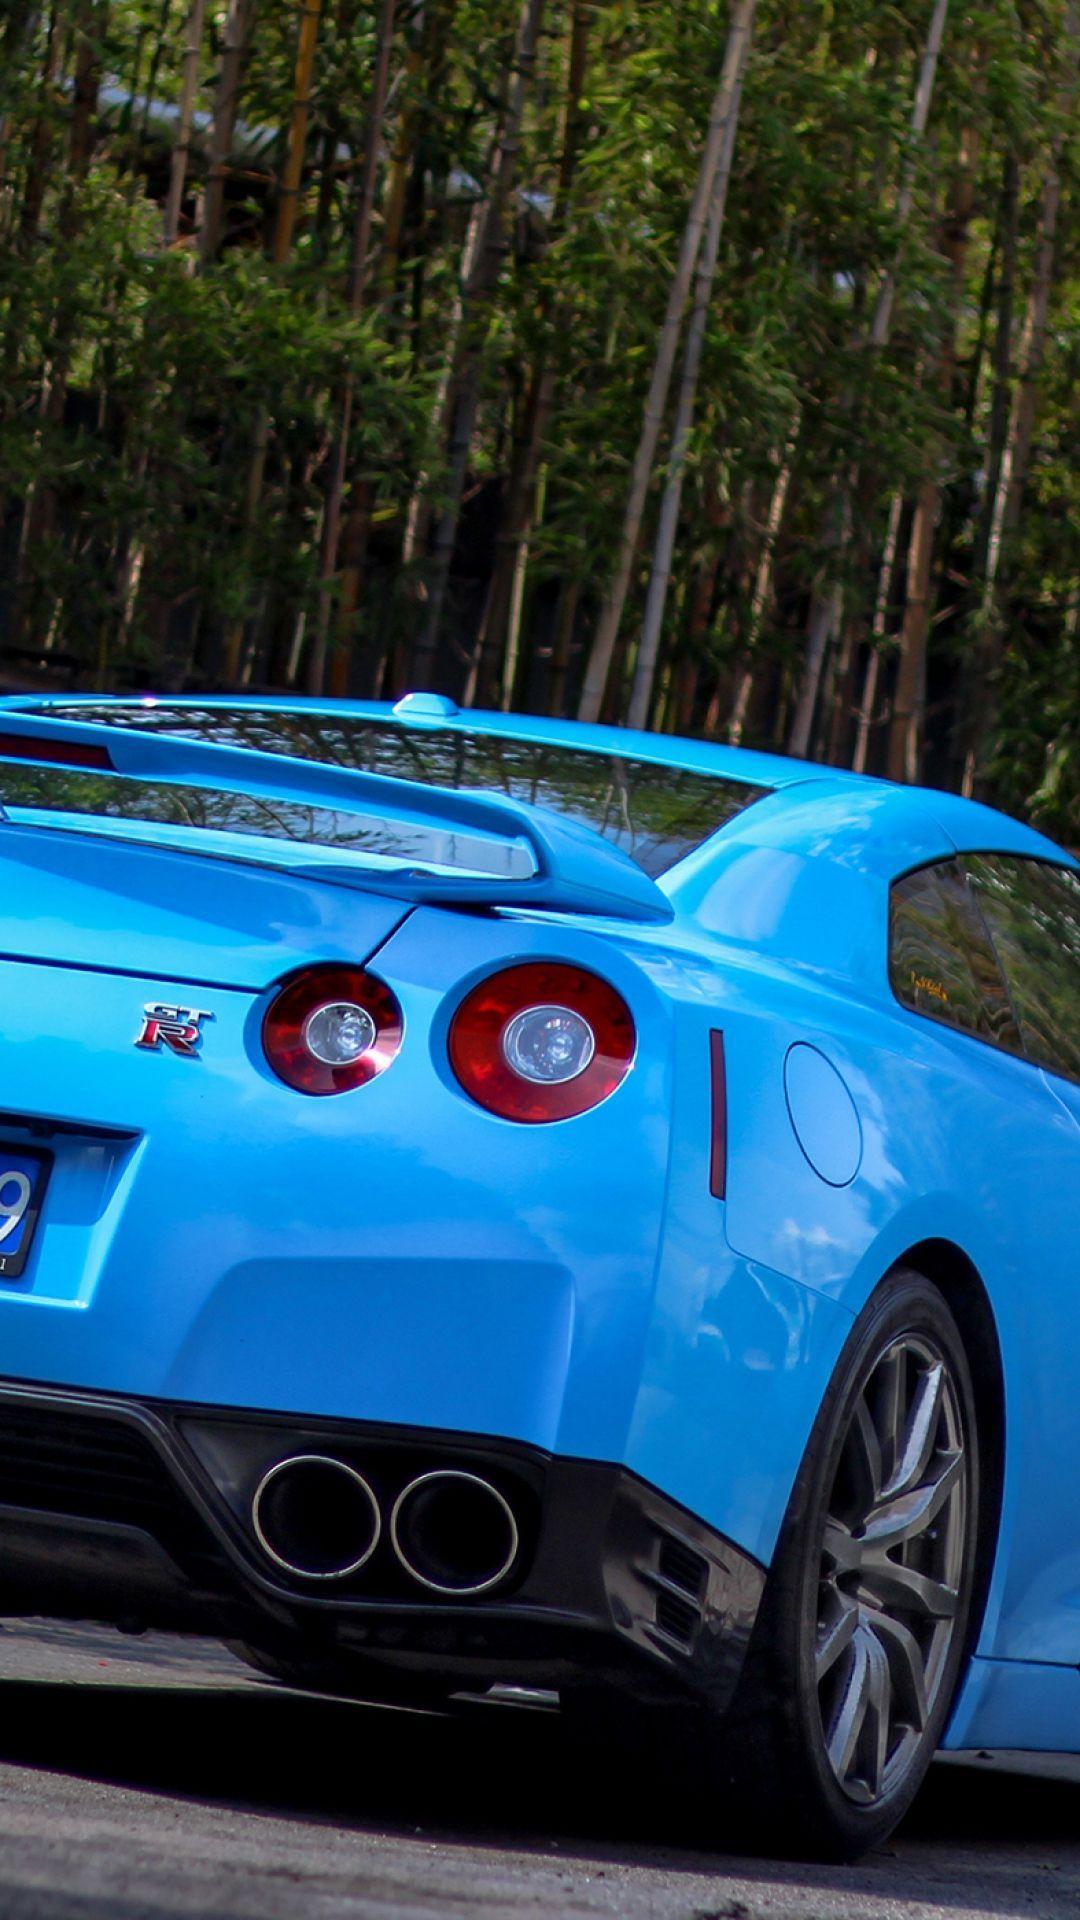 Blue Nissan Gt R Wallpapers Top Free Blue Nissan Gt R Backgrounds Wallpaperaccess